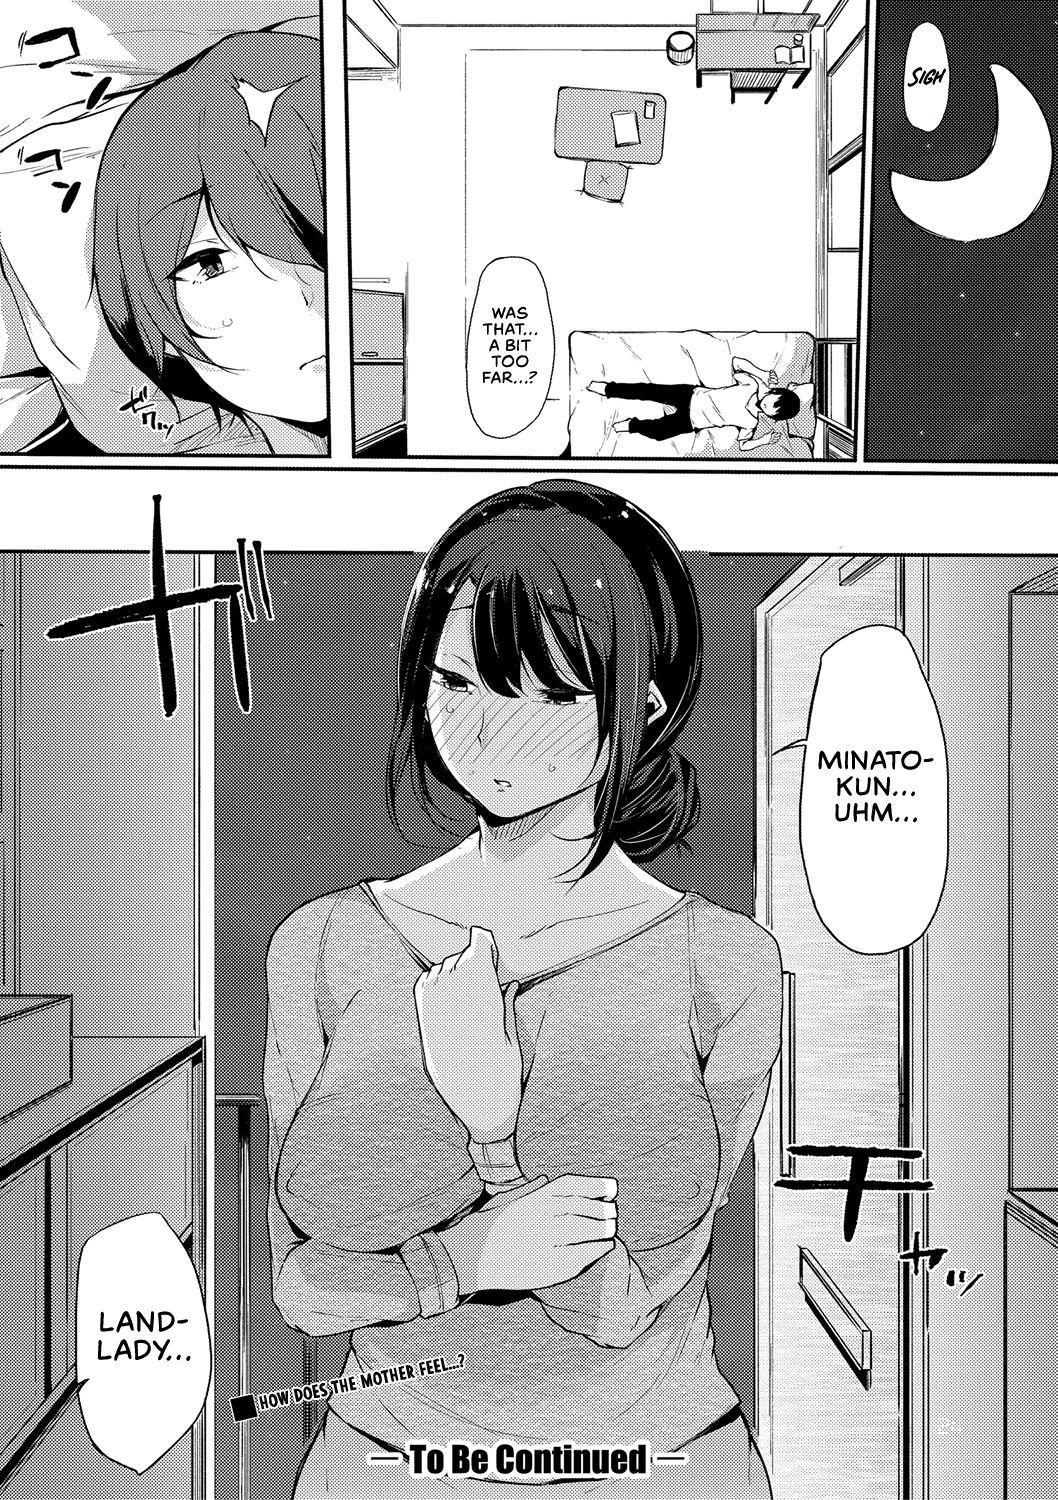 Dicks Musume Nochi Haha, Tokoroniyori Shunrai Zenpen | A Daughter followed by a Mother: A spring Full of Thunders. Female Orgasm - Page 24